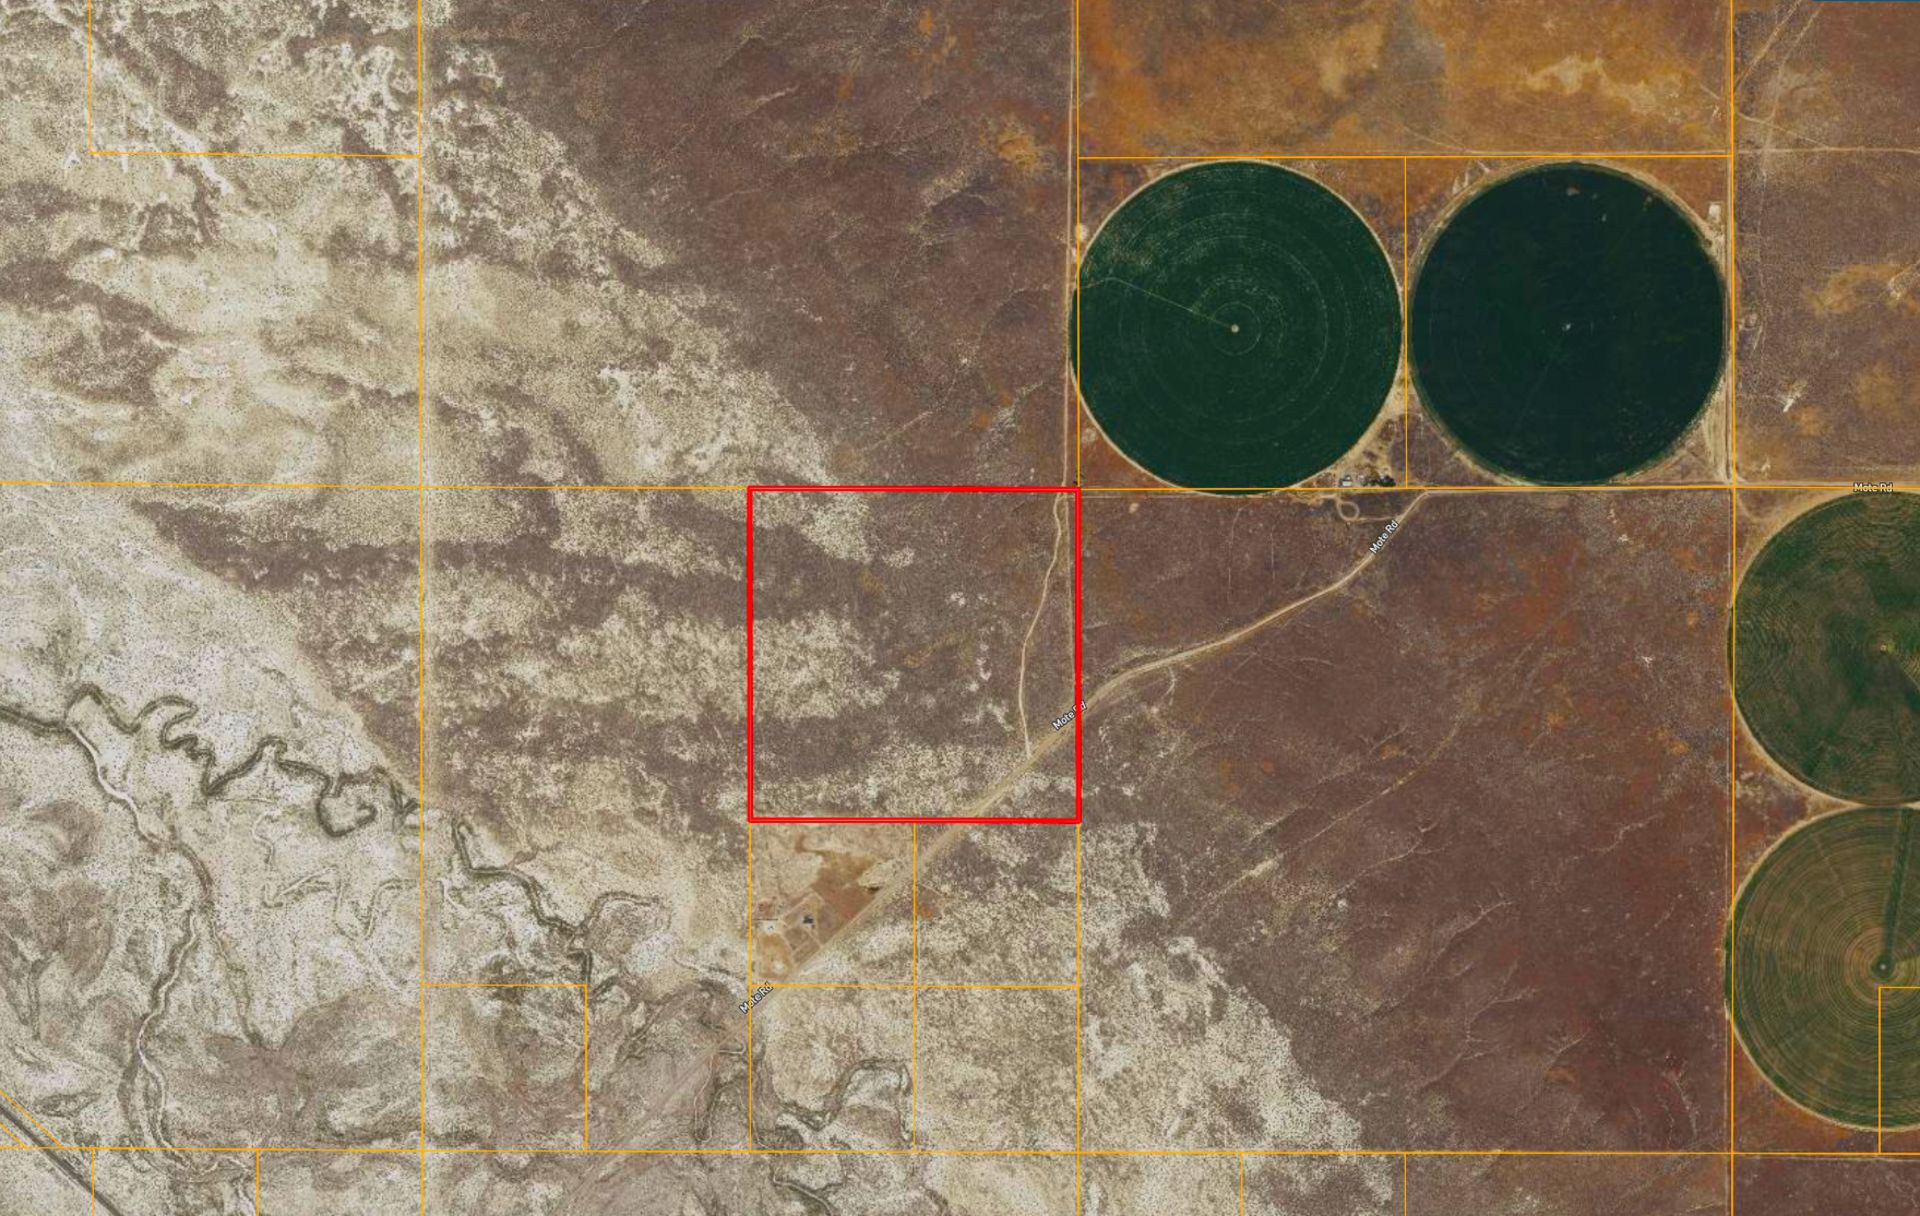 160 Acres Between the Mountains in Lander County, Nevada! BIDDING IS PER ACRE! - Image 10 of 16